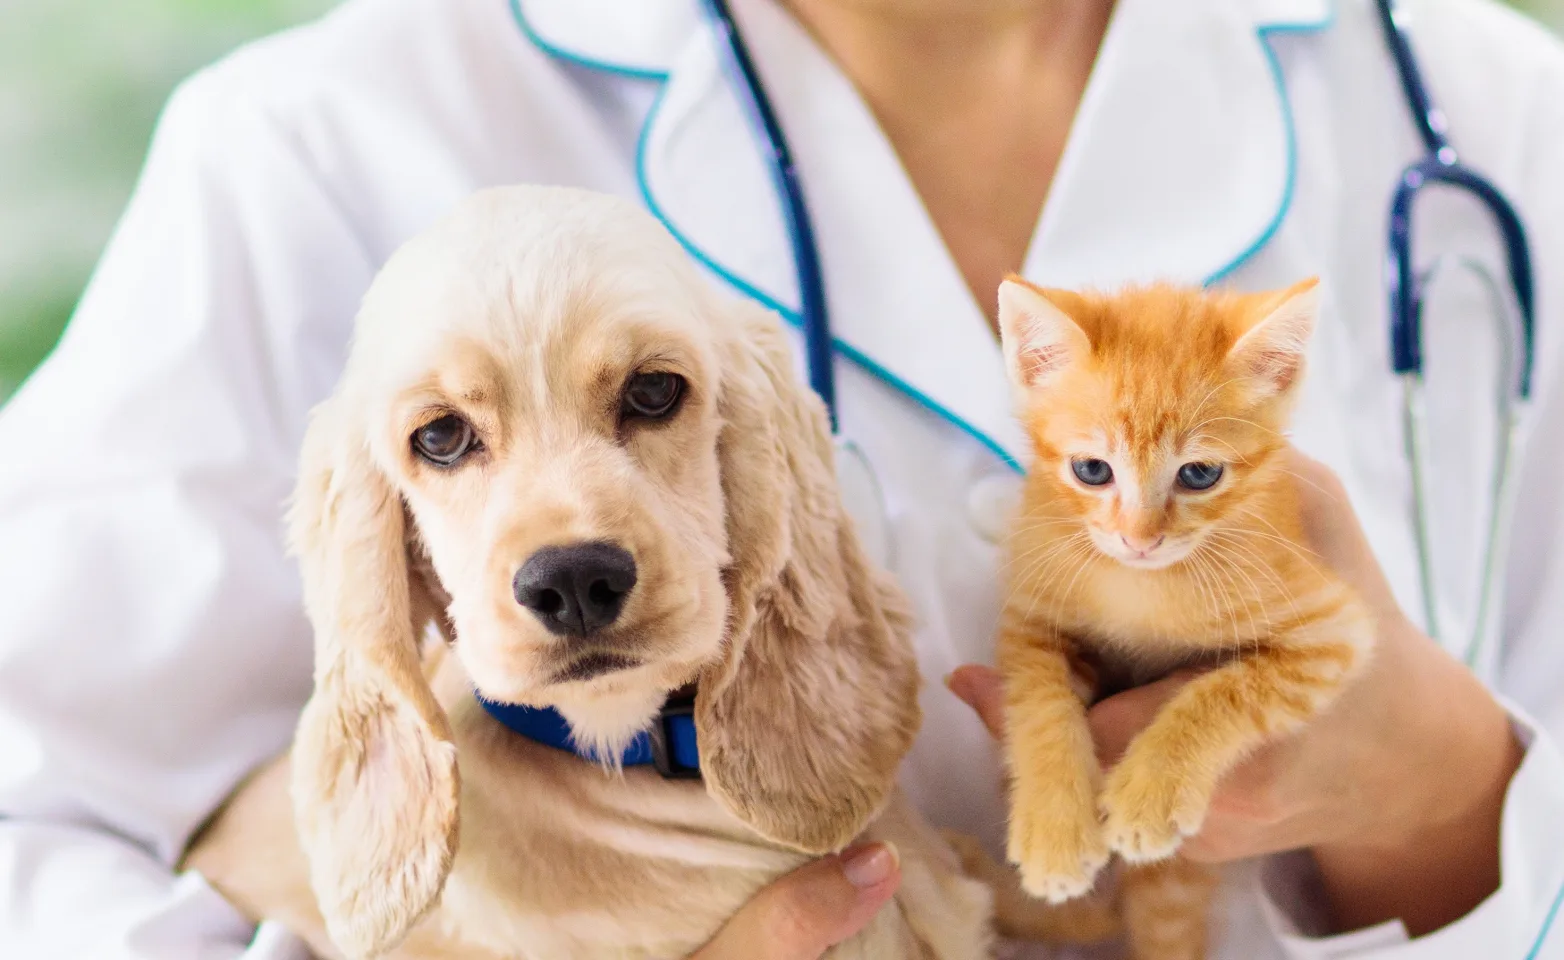 Doctor holding dog and cat